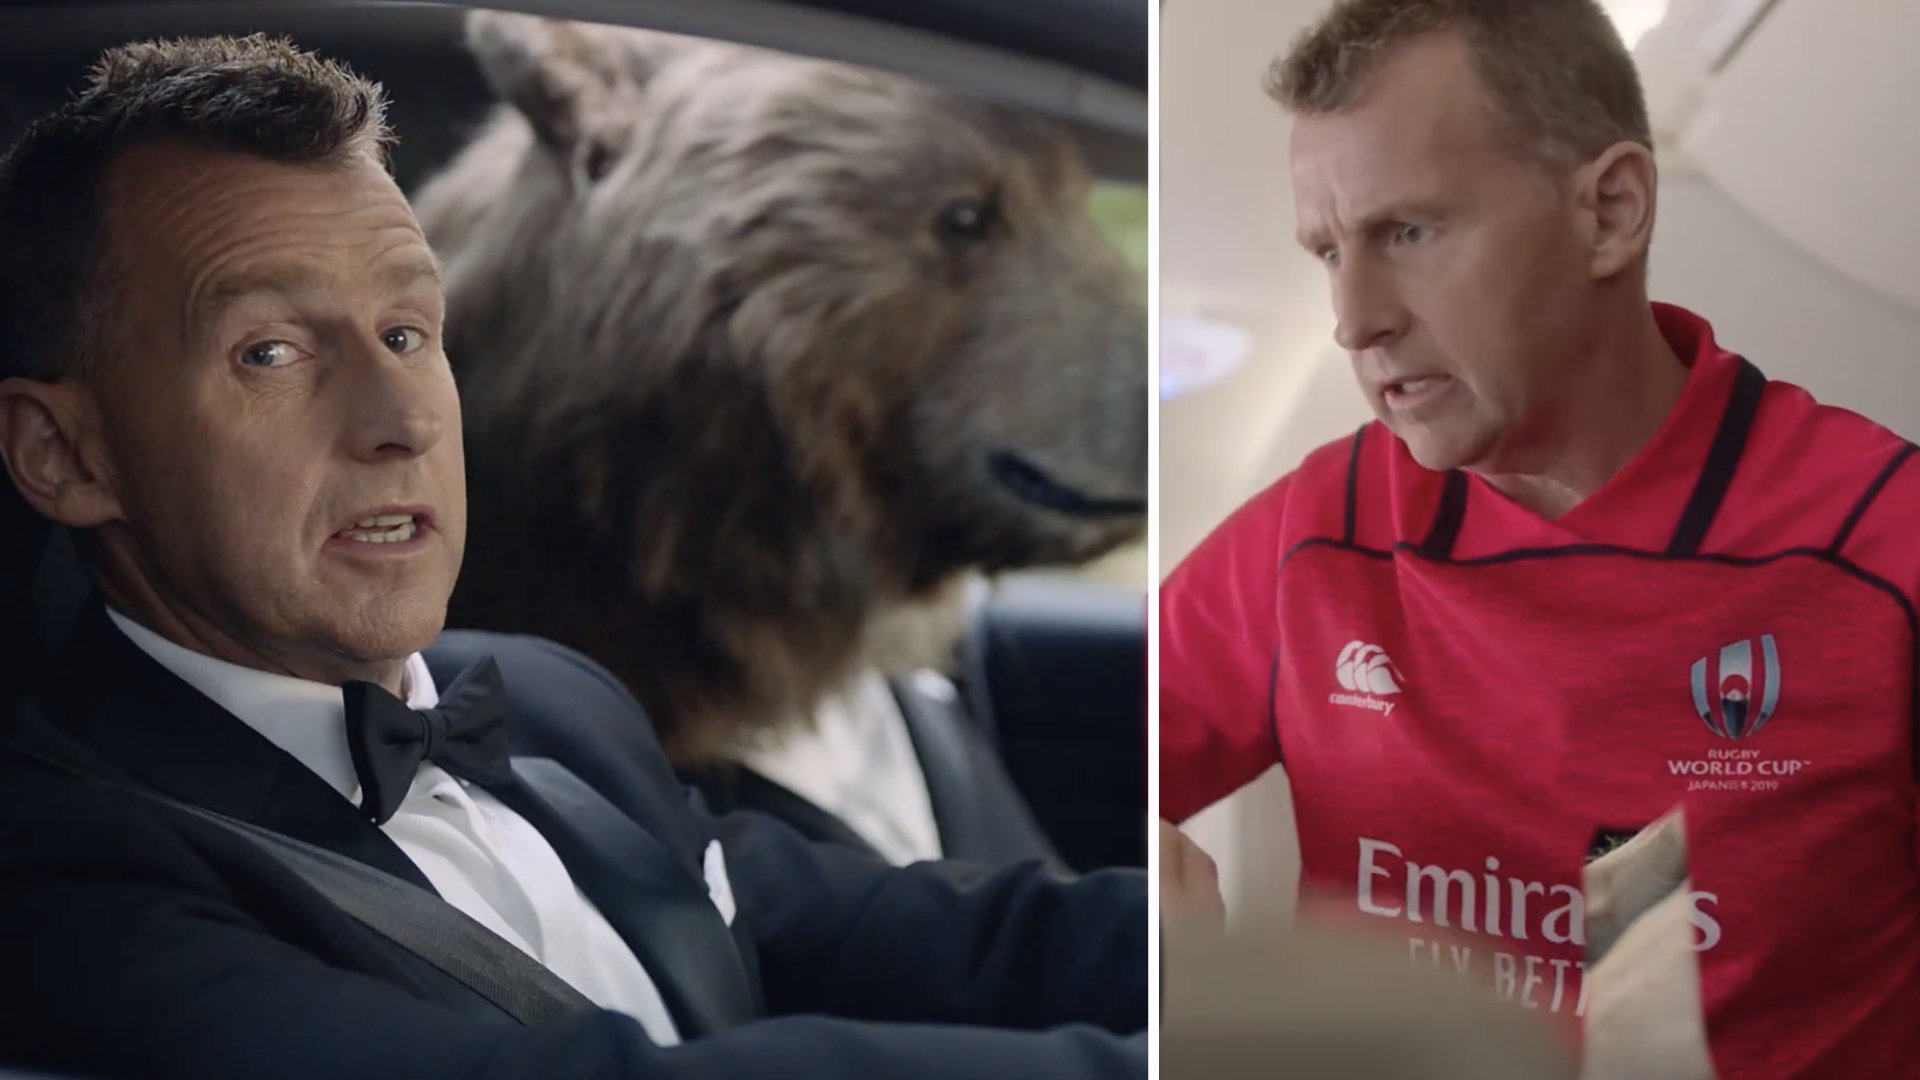 Nigel Owens is the gift that keeps on giving in hilarious World Cup ads